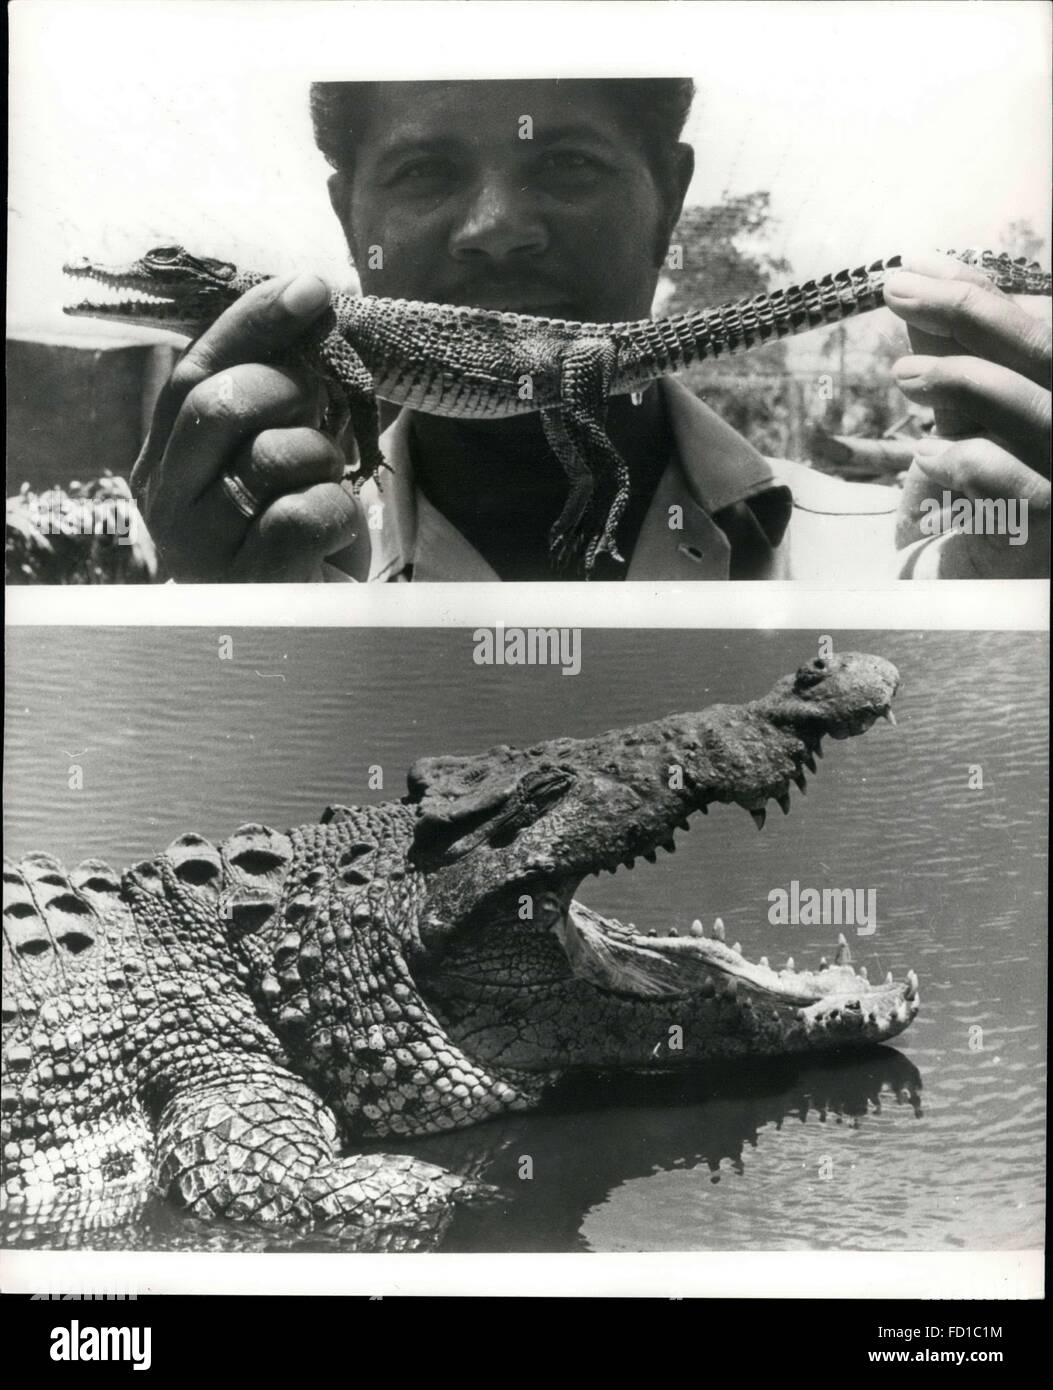 1976 - Crocodile breeding in Cuba: One of the peculiarities of Cuba is crocodile breeding. On the largest farm at Cienaga de Zapata in the National Park, Matanzas Province, there are more than 20,000 crocodiles, some being 14 to 16 years old. The farm employes several workers who collect crocodile eggs and put them into special hatcheries (one crocodile lays up to 30 eggs a month). Later, when the breed will be still bigger, the reptiles will be killed and their precious skins will be processed. Photo shows In this join-up picture we see an eight month old crocodile looking quite harmless (top Stock Photo